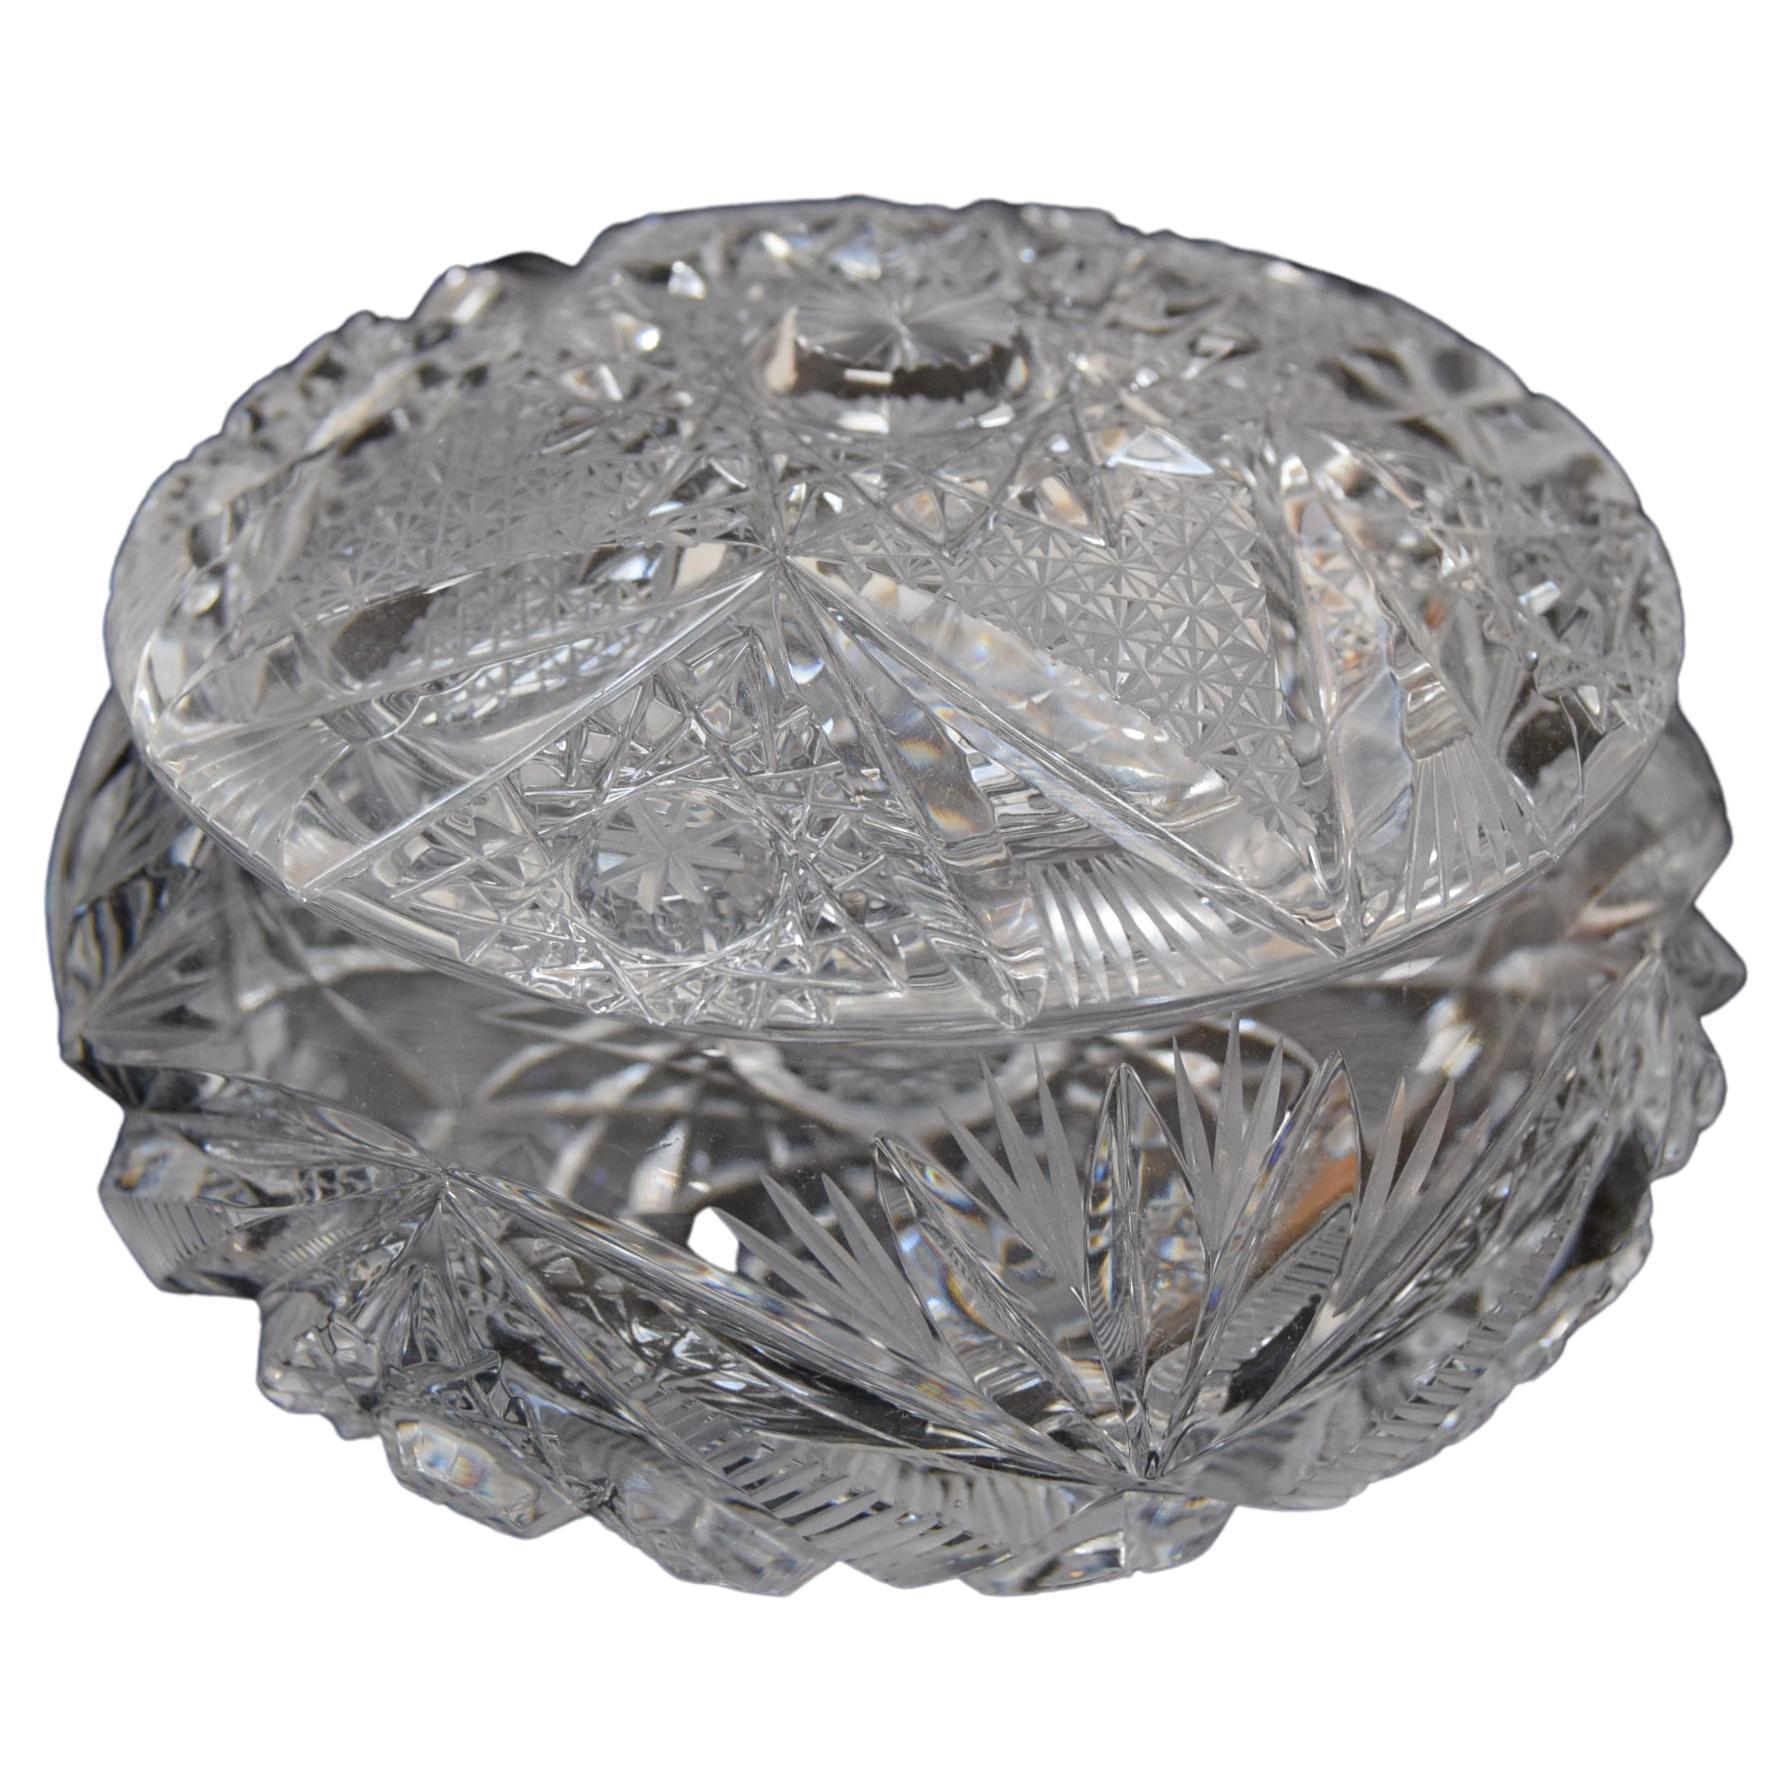 Rare Vintage Sugary Bowl, Cut Crystal Glass, Bohemia in the, 1960s